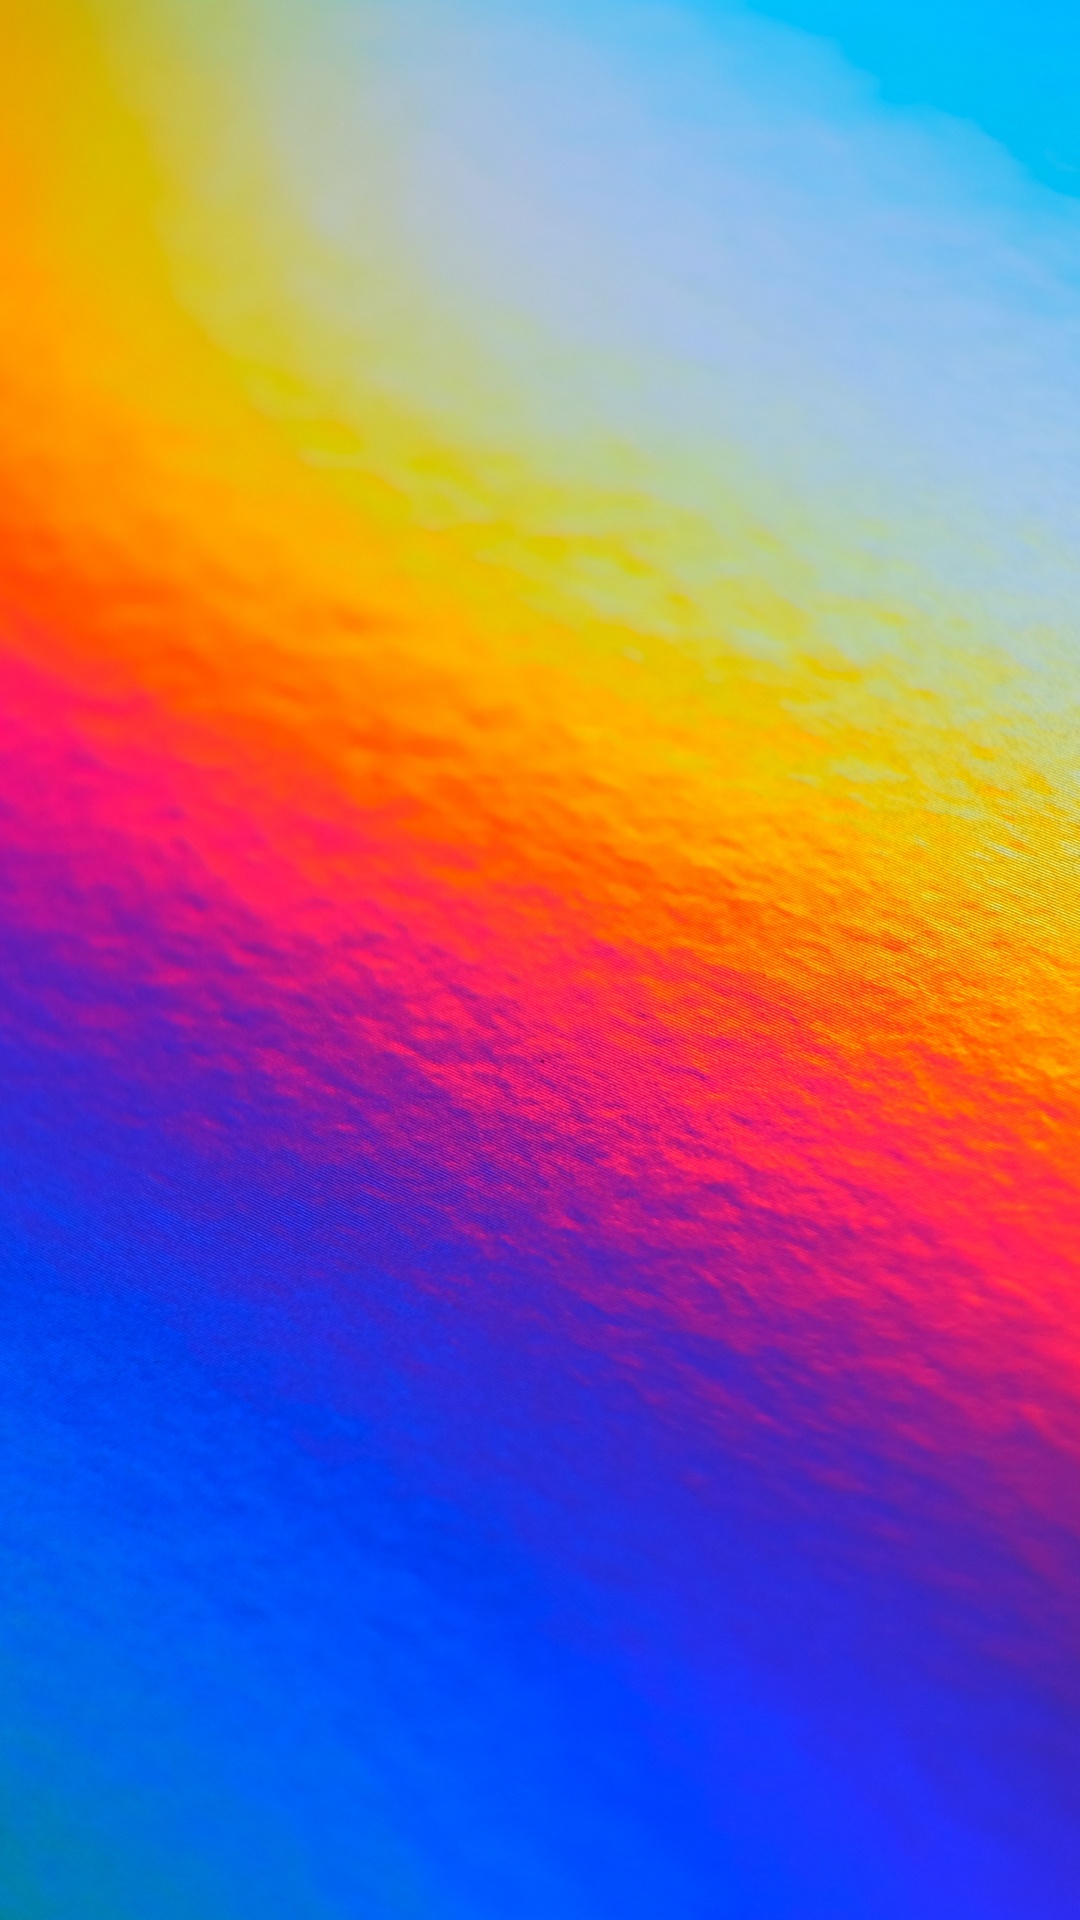 Orange and Blue Abstract Painting. Wallpaper in 1080x1920 Resolution